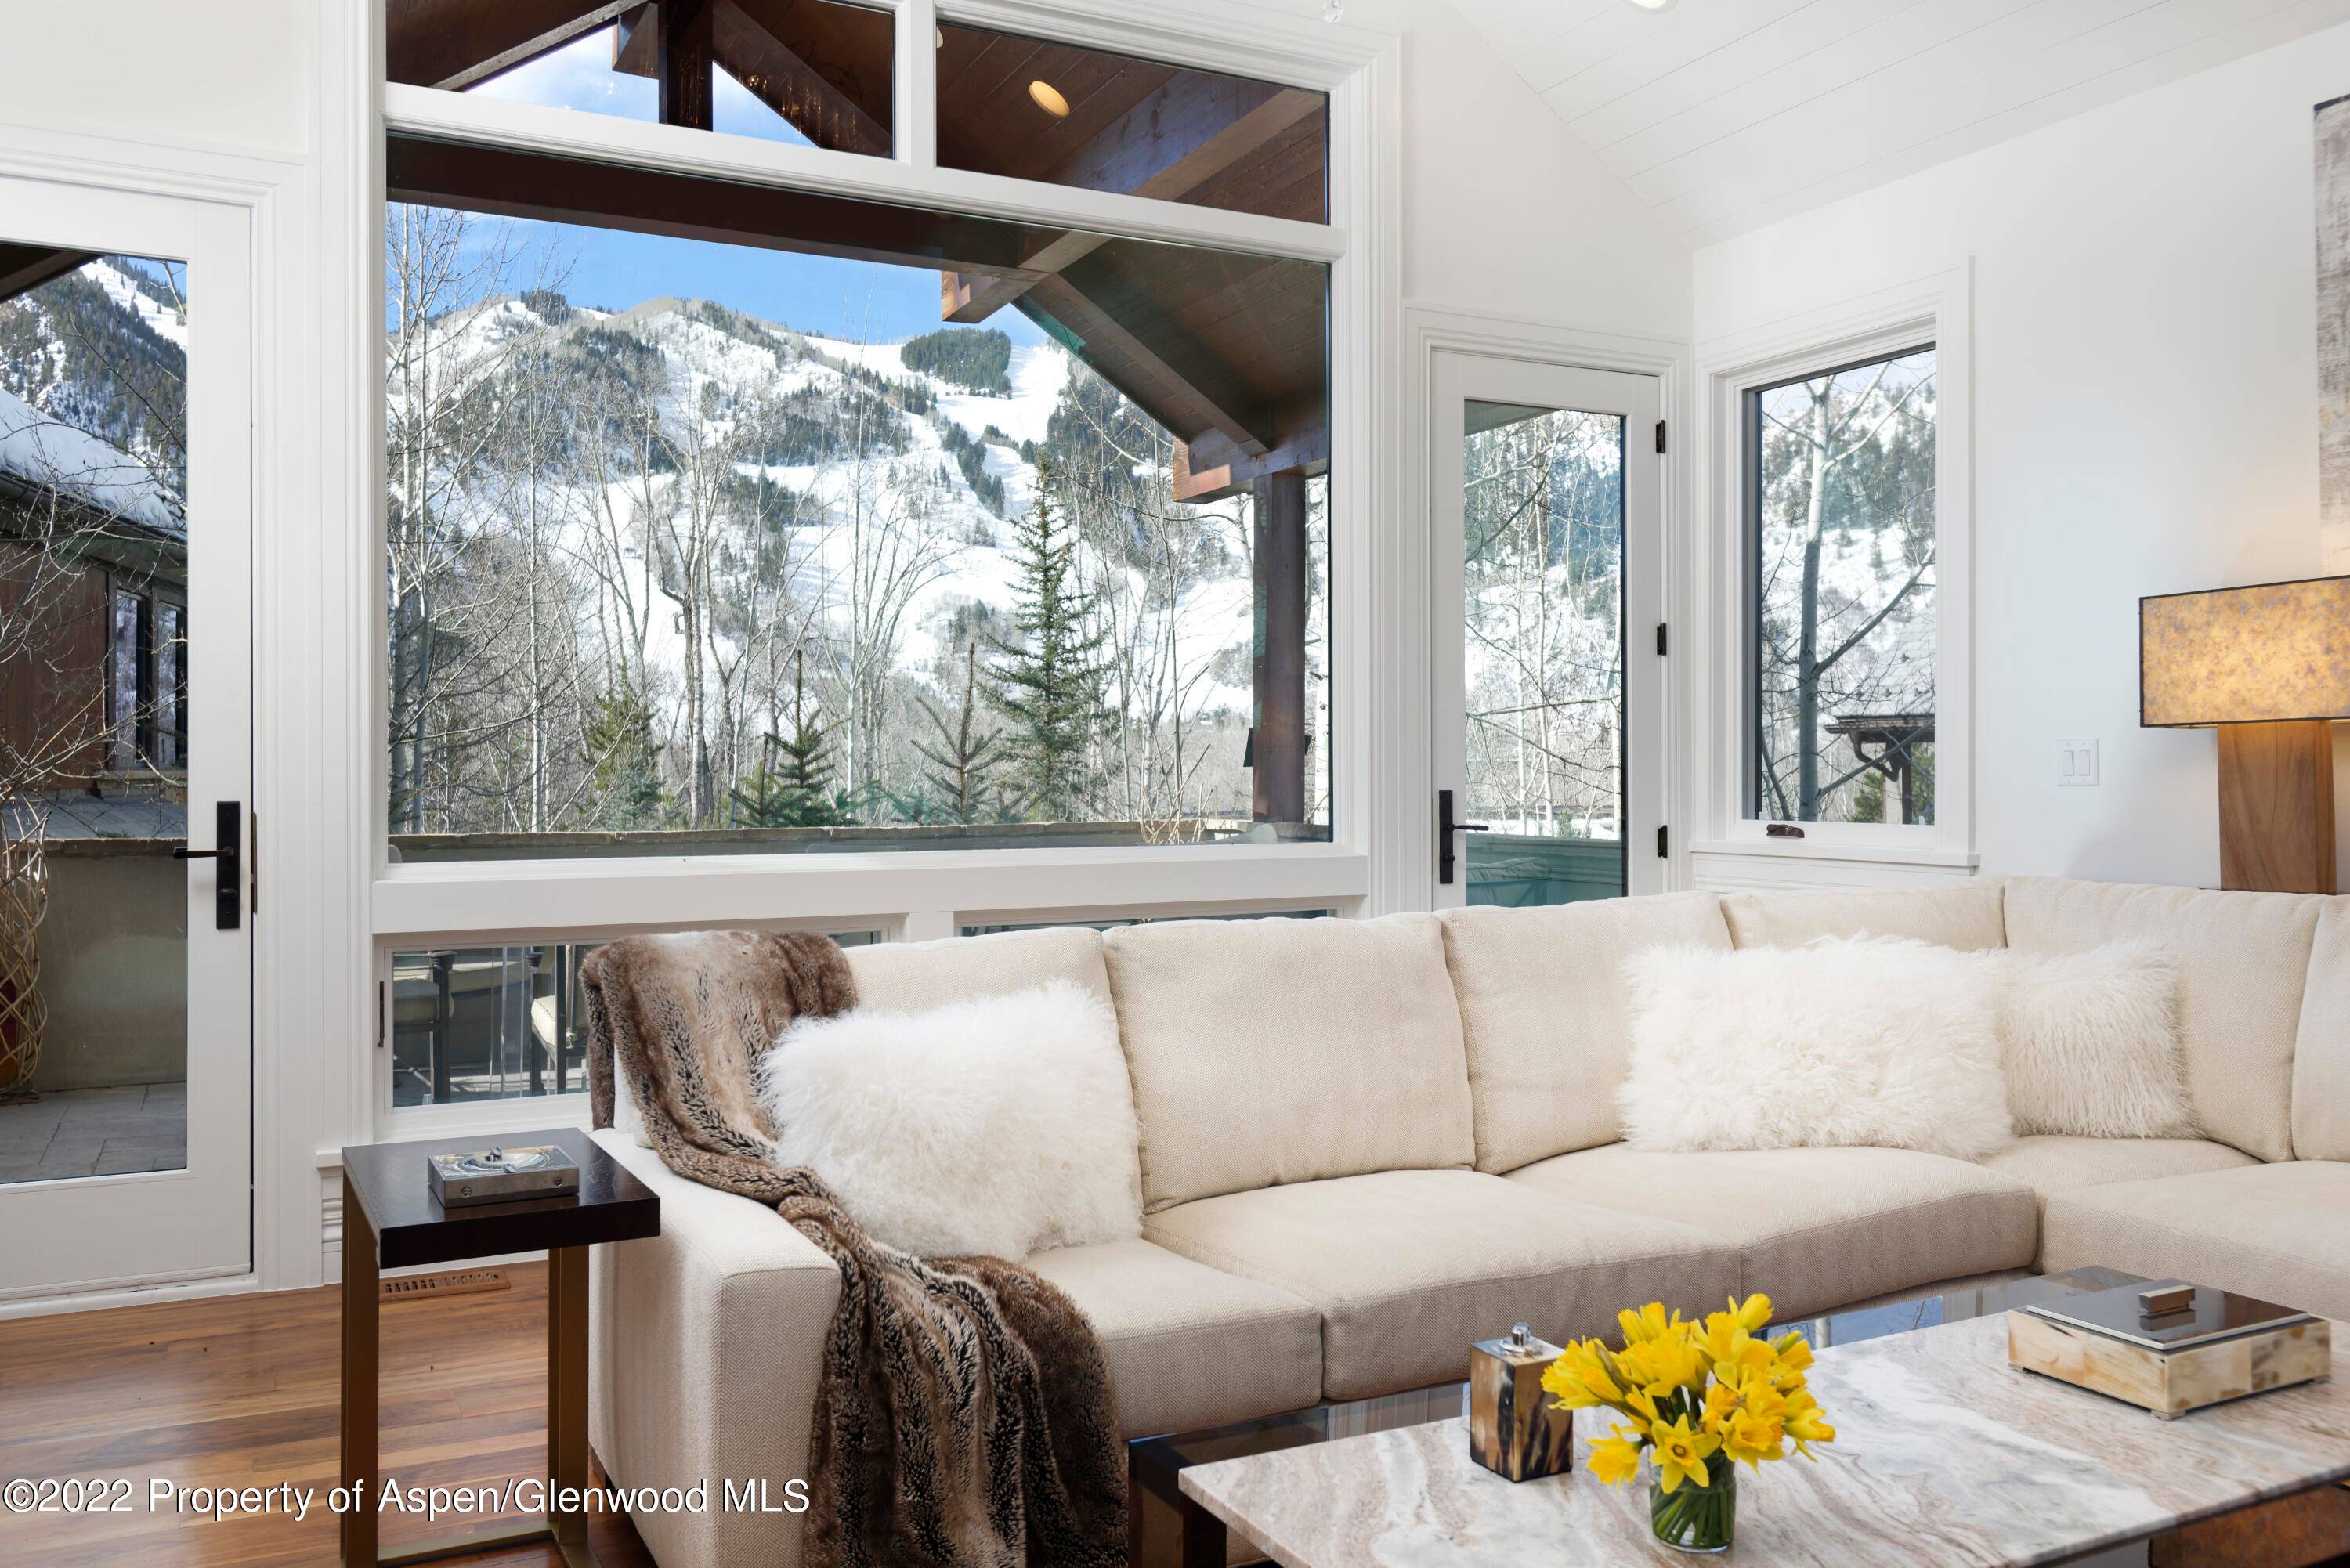 Roomy, Contemporary Retreat walking distance to Aspen's core but far enough for peace and quiet.